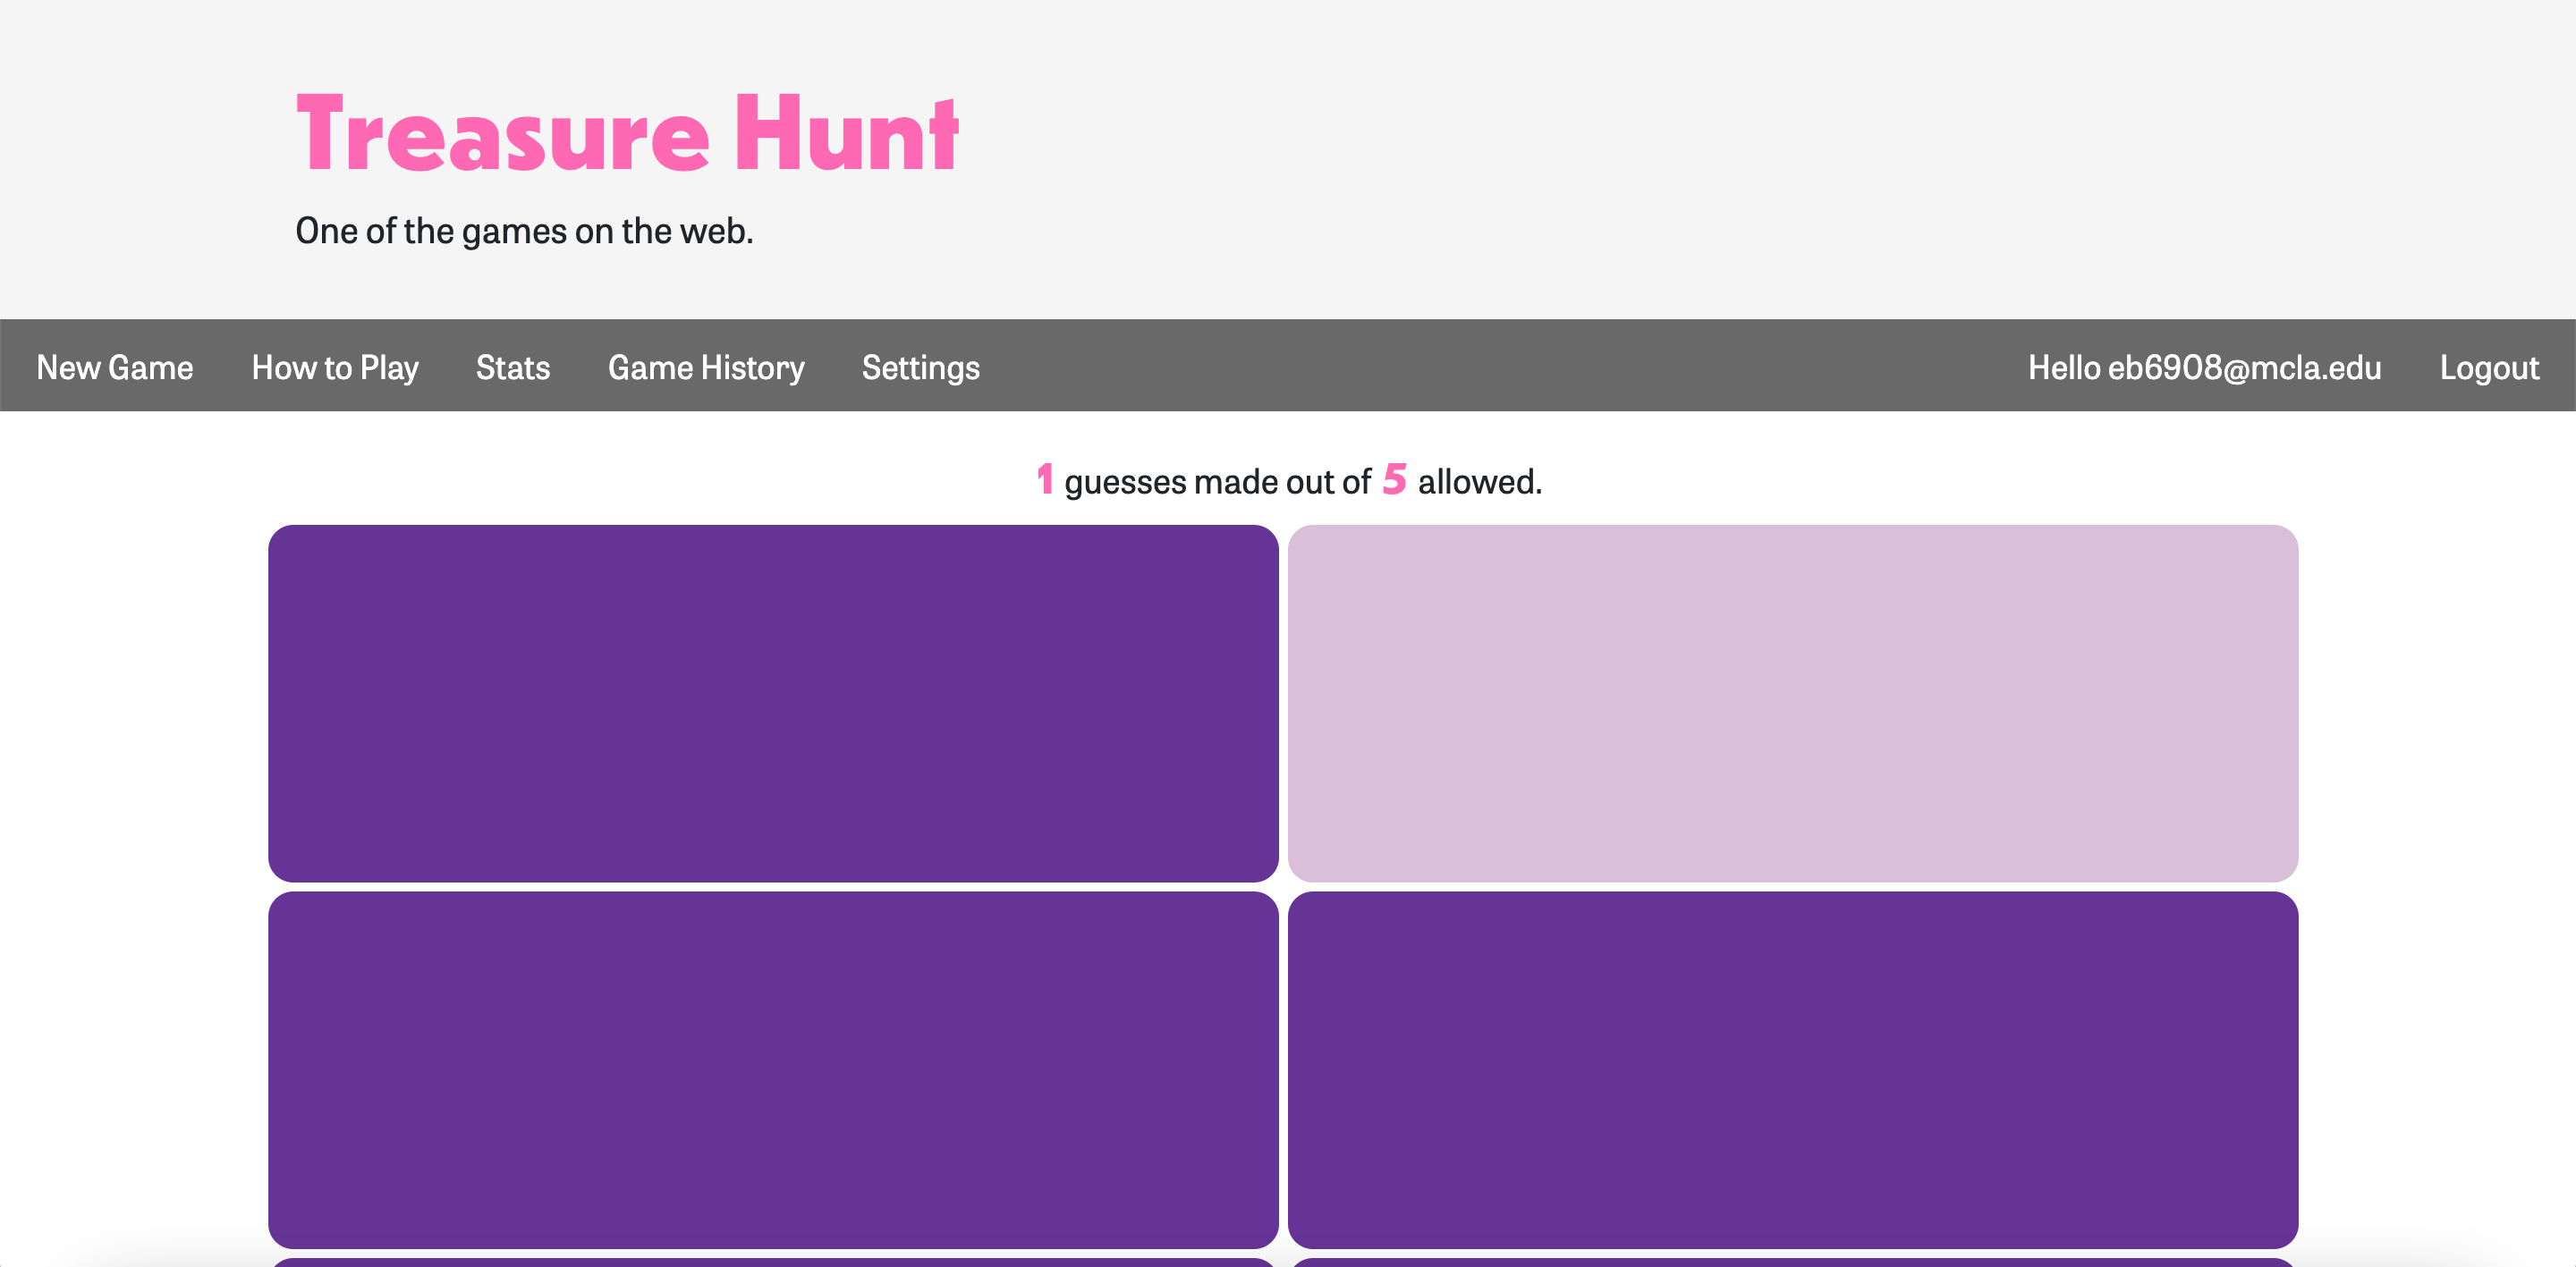 Screenshot of a website with a treaure hunt game